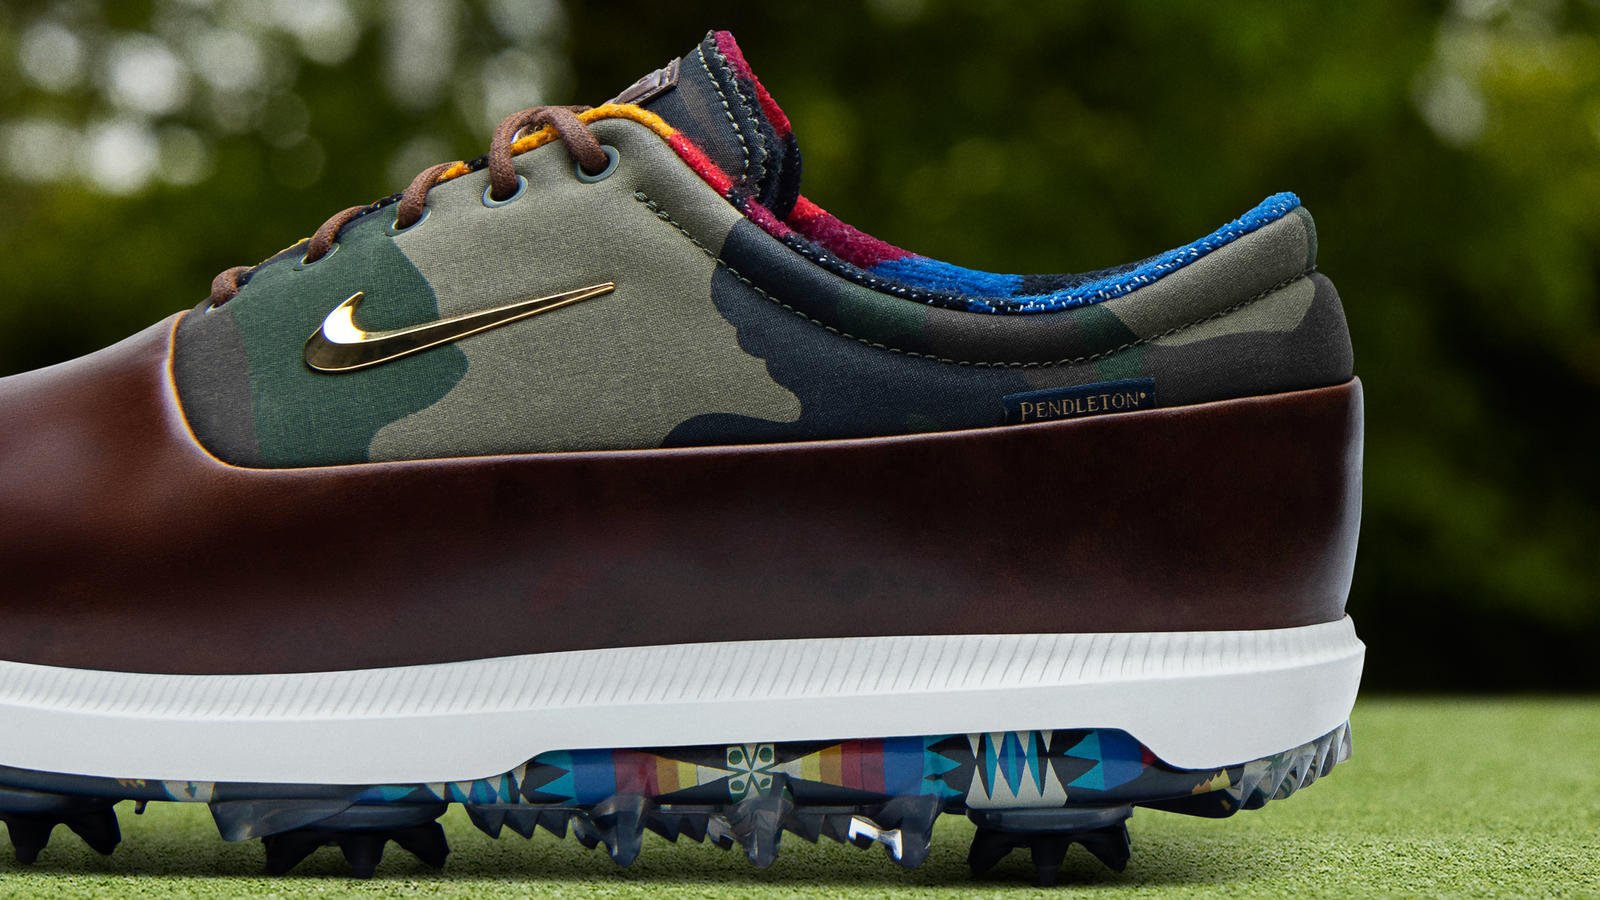 Seamus Nike Golf Air Zoom Victory Tour Release Date Info